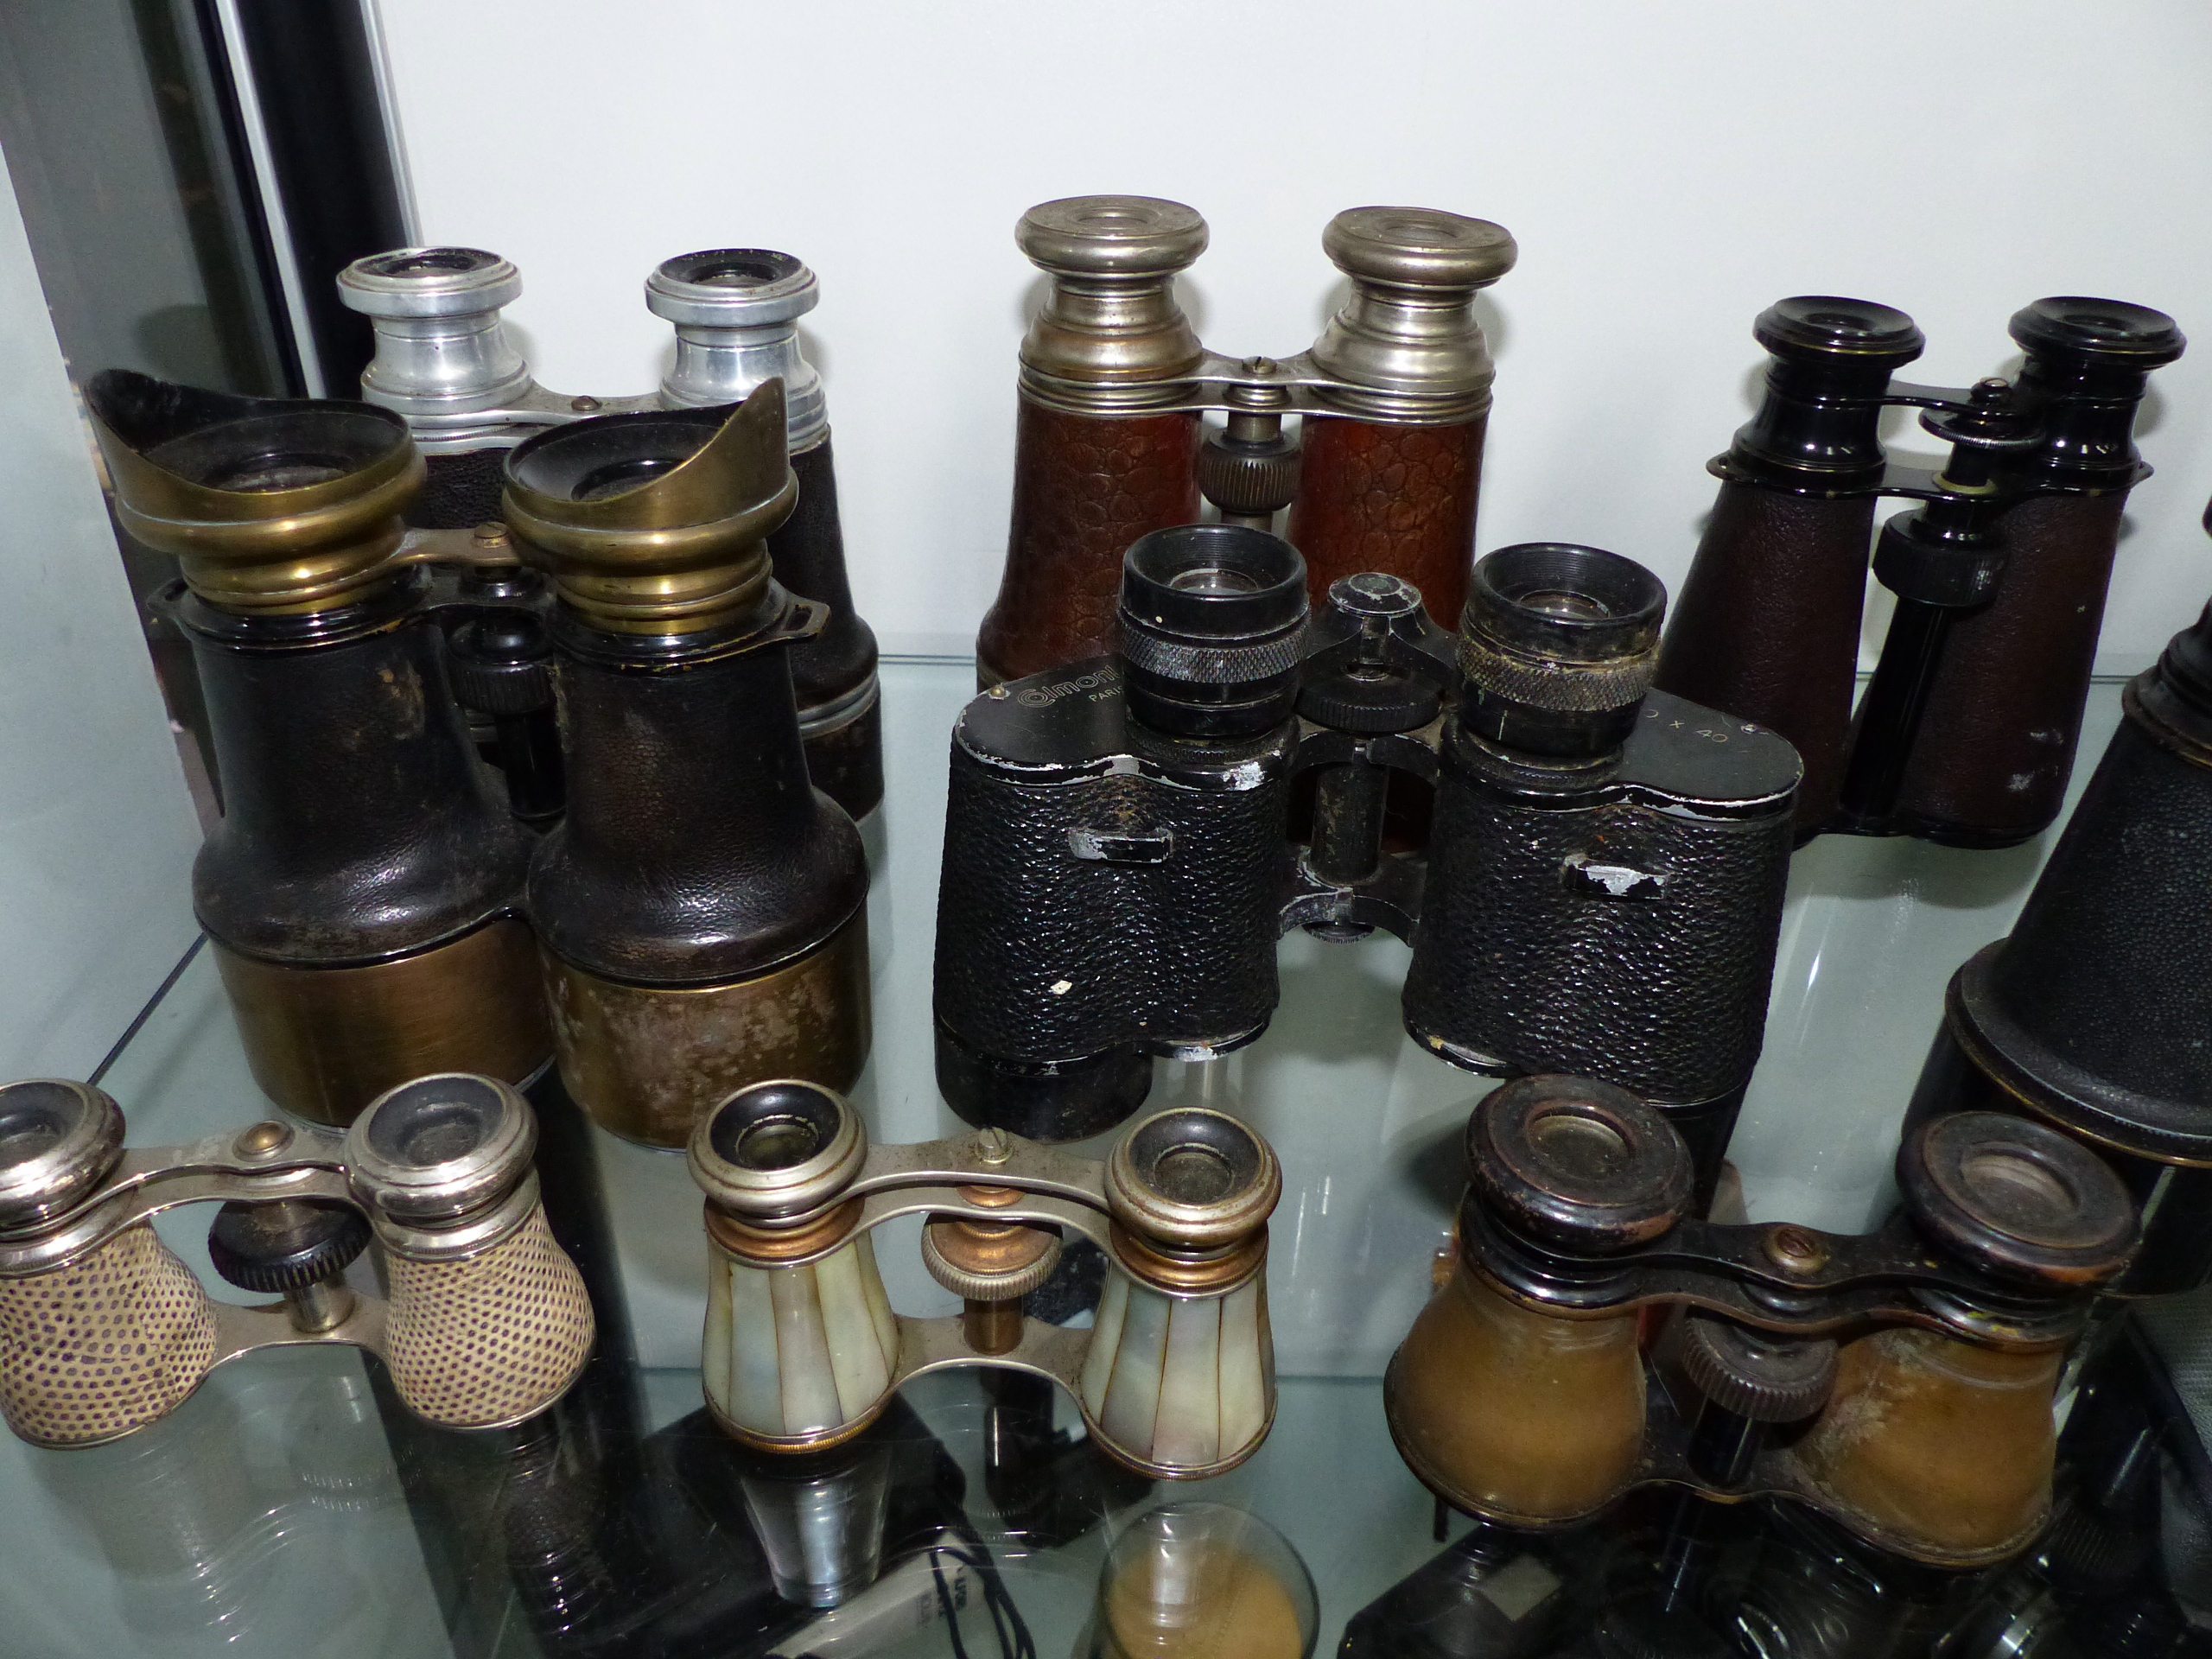 A COLLECTION OF TWELVE PAIRS OF BINOCULARS, FIELD GLASSES AND OPERA GLASSES. (12) - Image 2 of 2